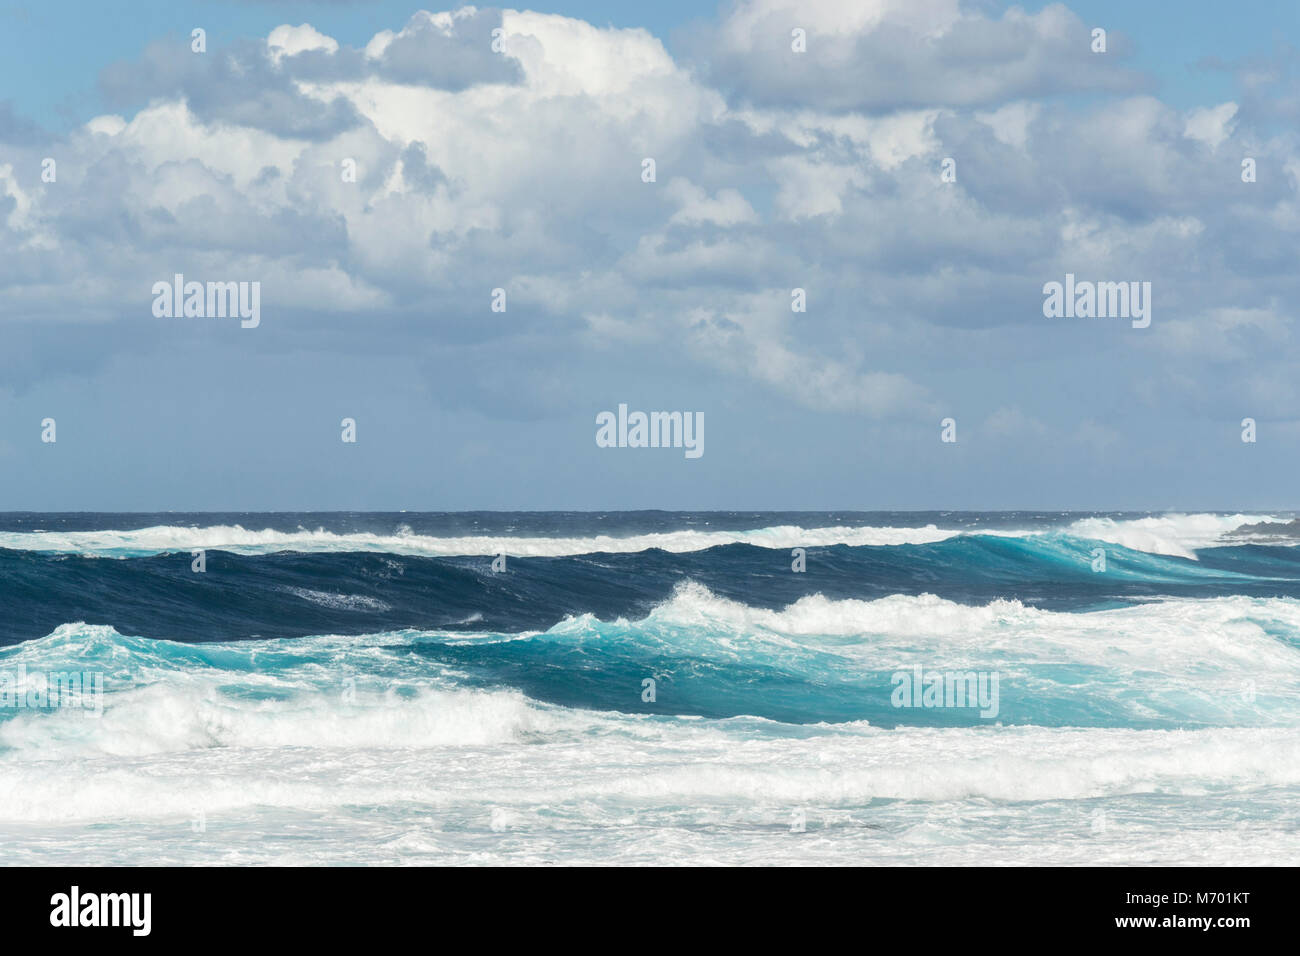 Rough turquoise sea with big waves and surf at La Santa, Lanzarote, Canary Islands, Spain Stock Photo